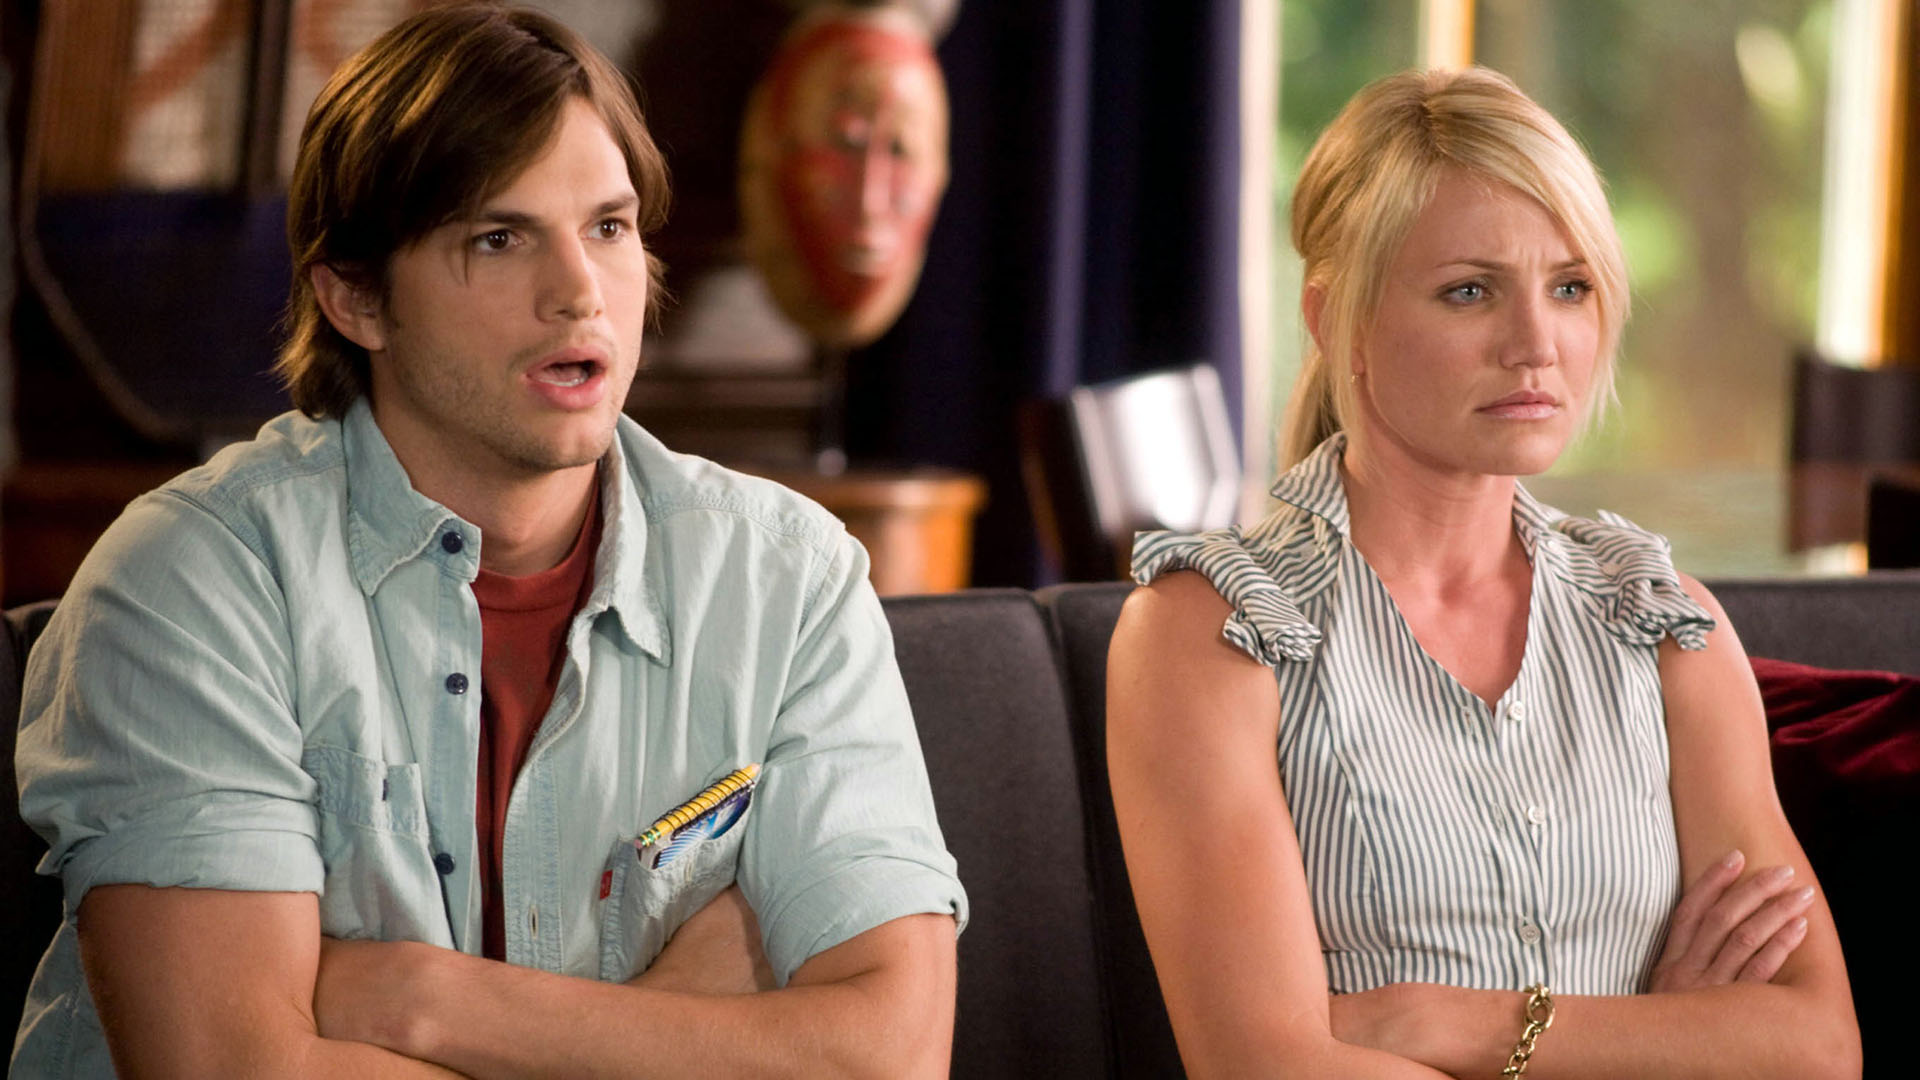 15 Romance Movies from the 2000s So Bad, They're Actually Good